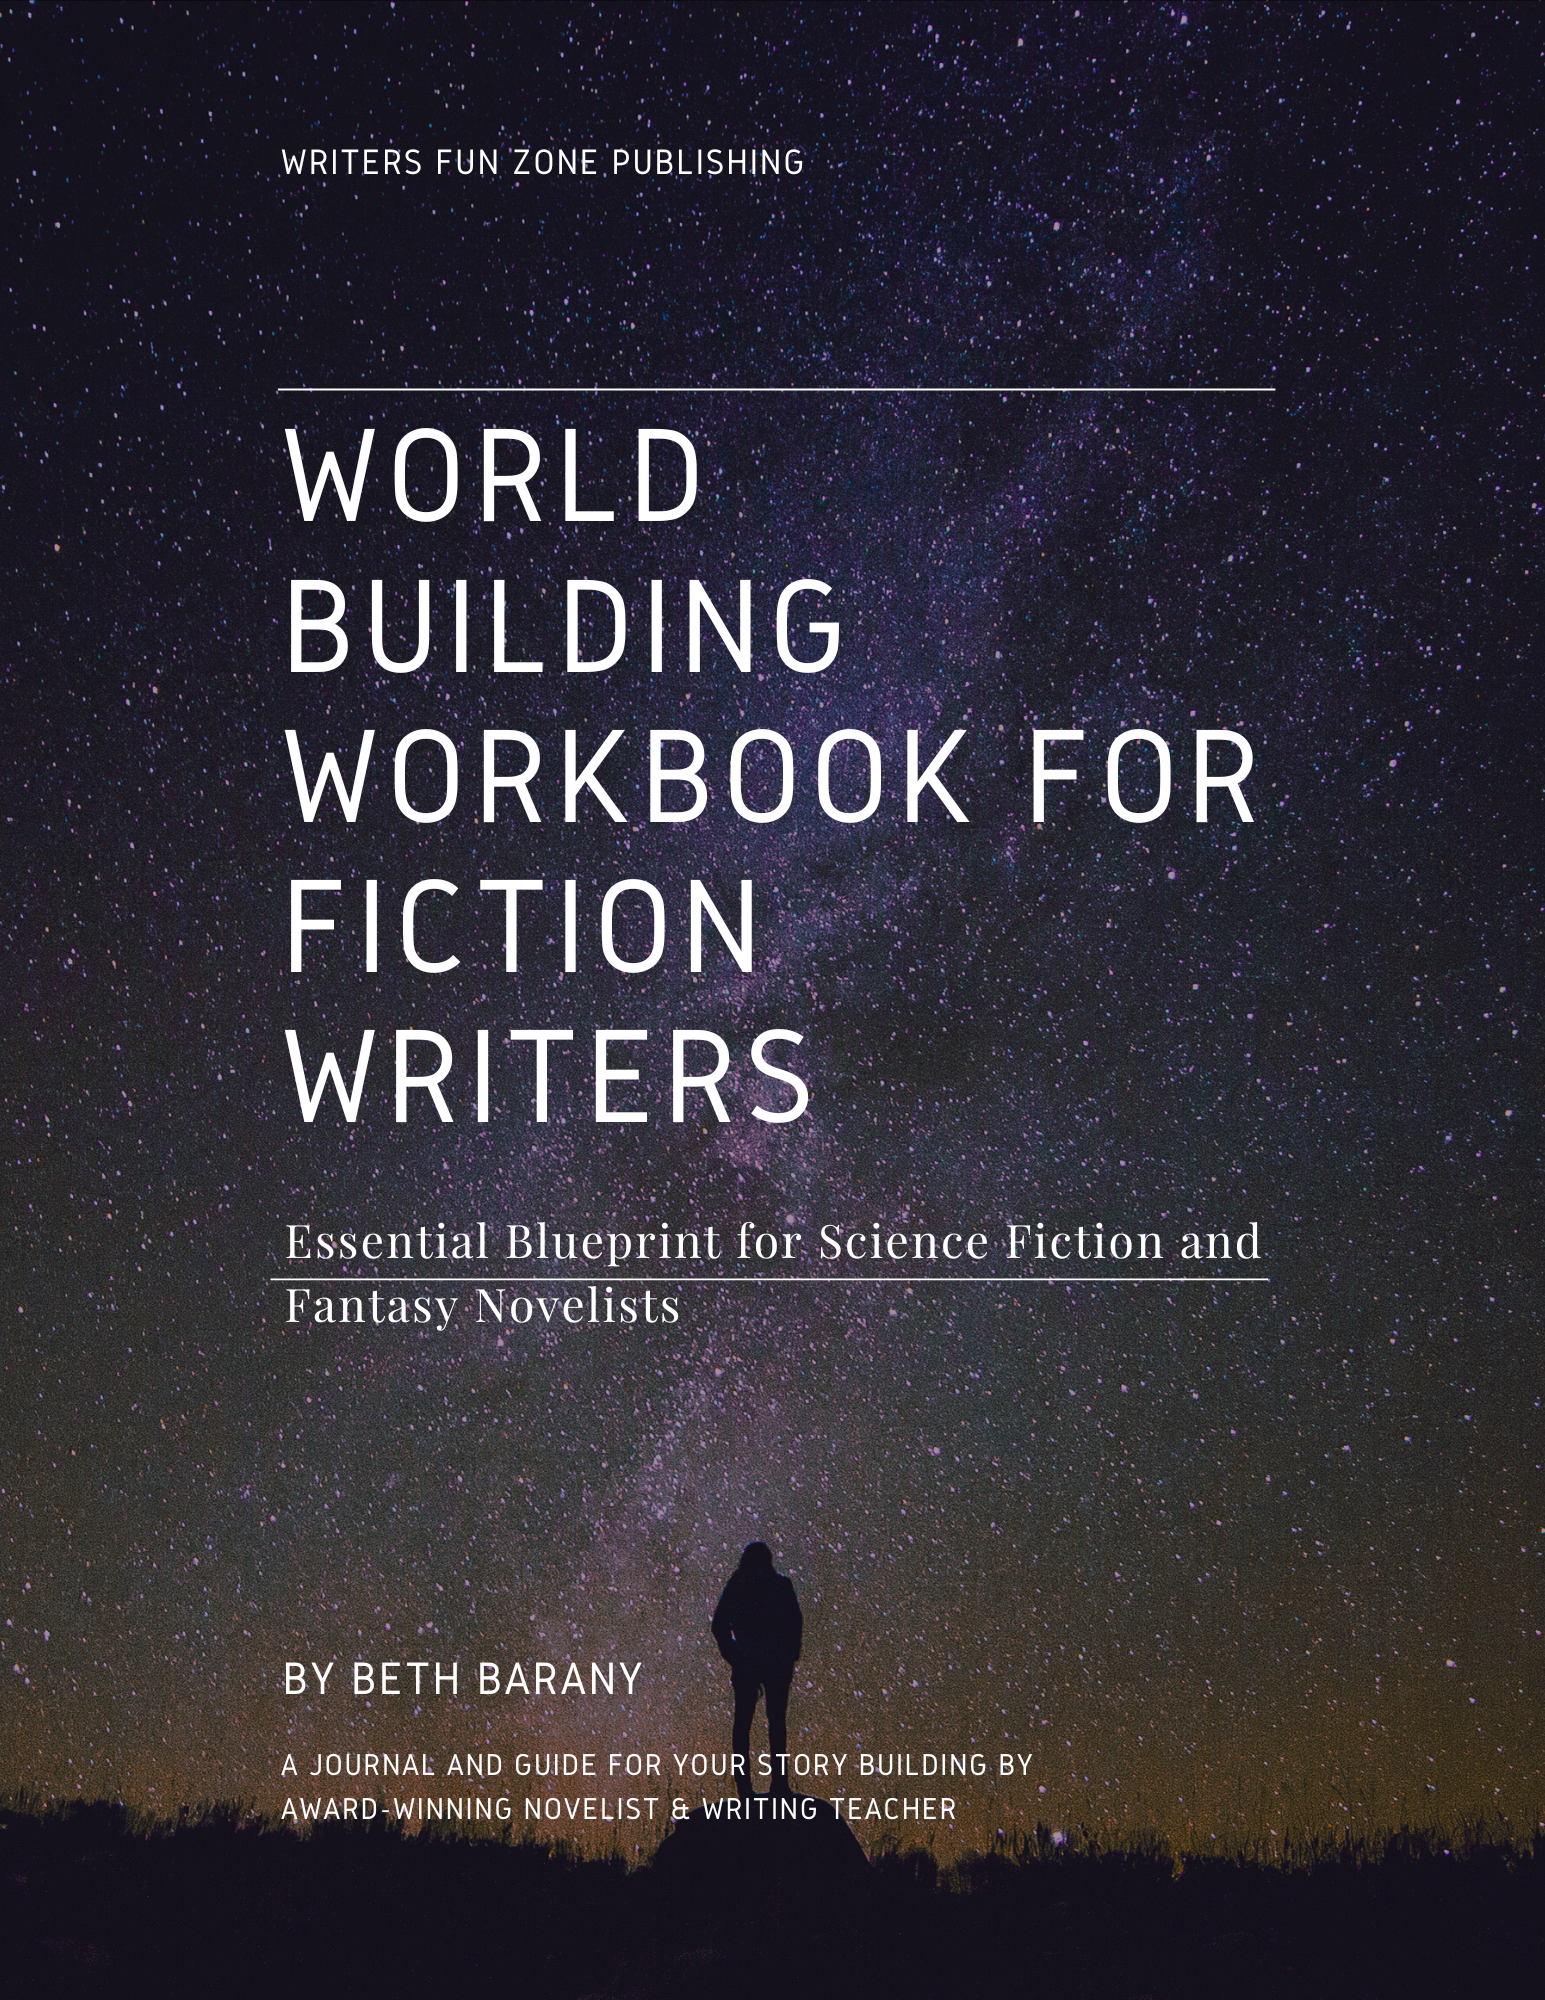 World Building Workbook for Fiction Writers: